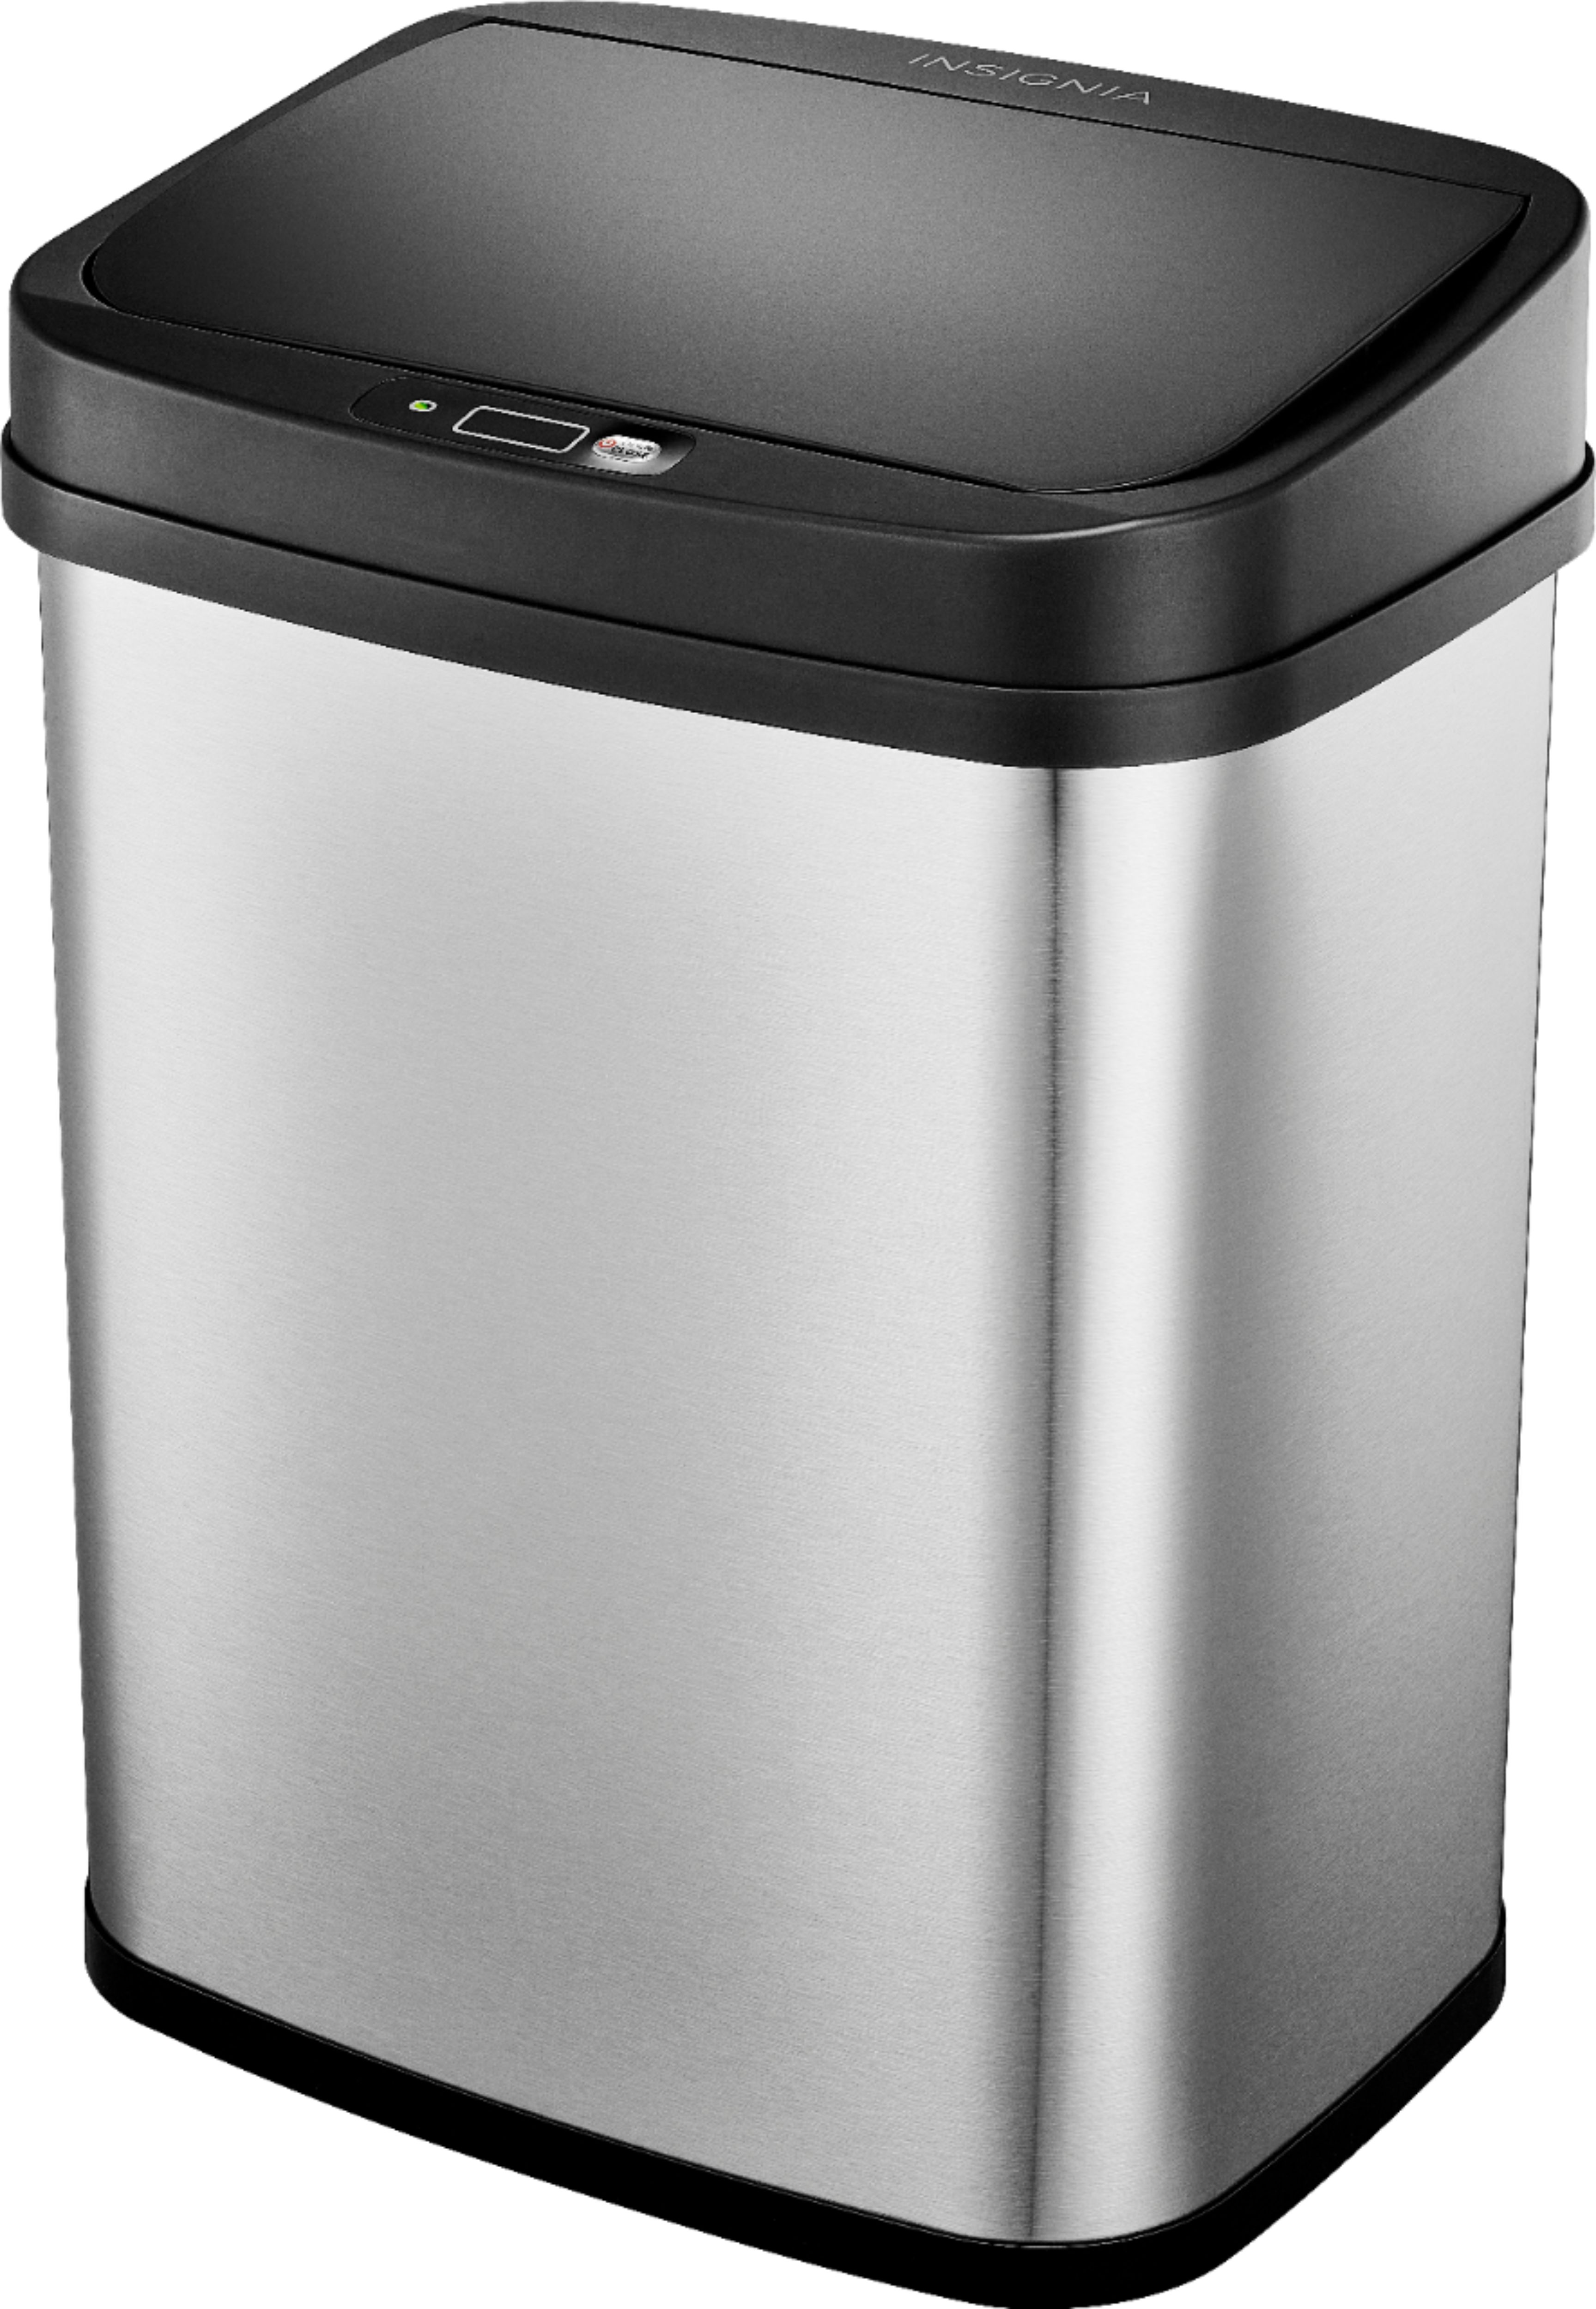 Insignia 3-Gallon Stainless Steel Automatic Trash Can + Free Store Pickup $19.99